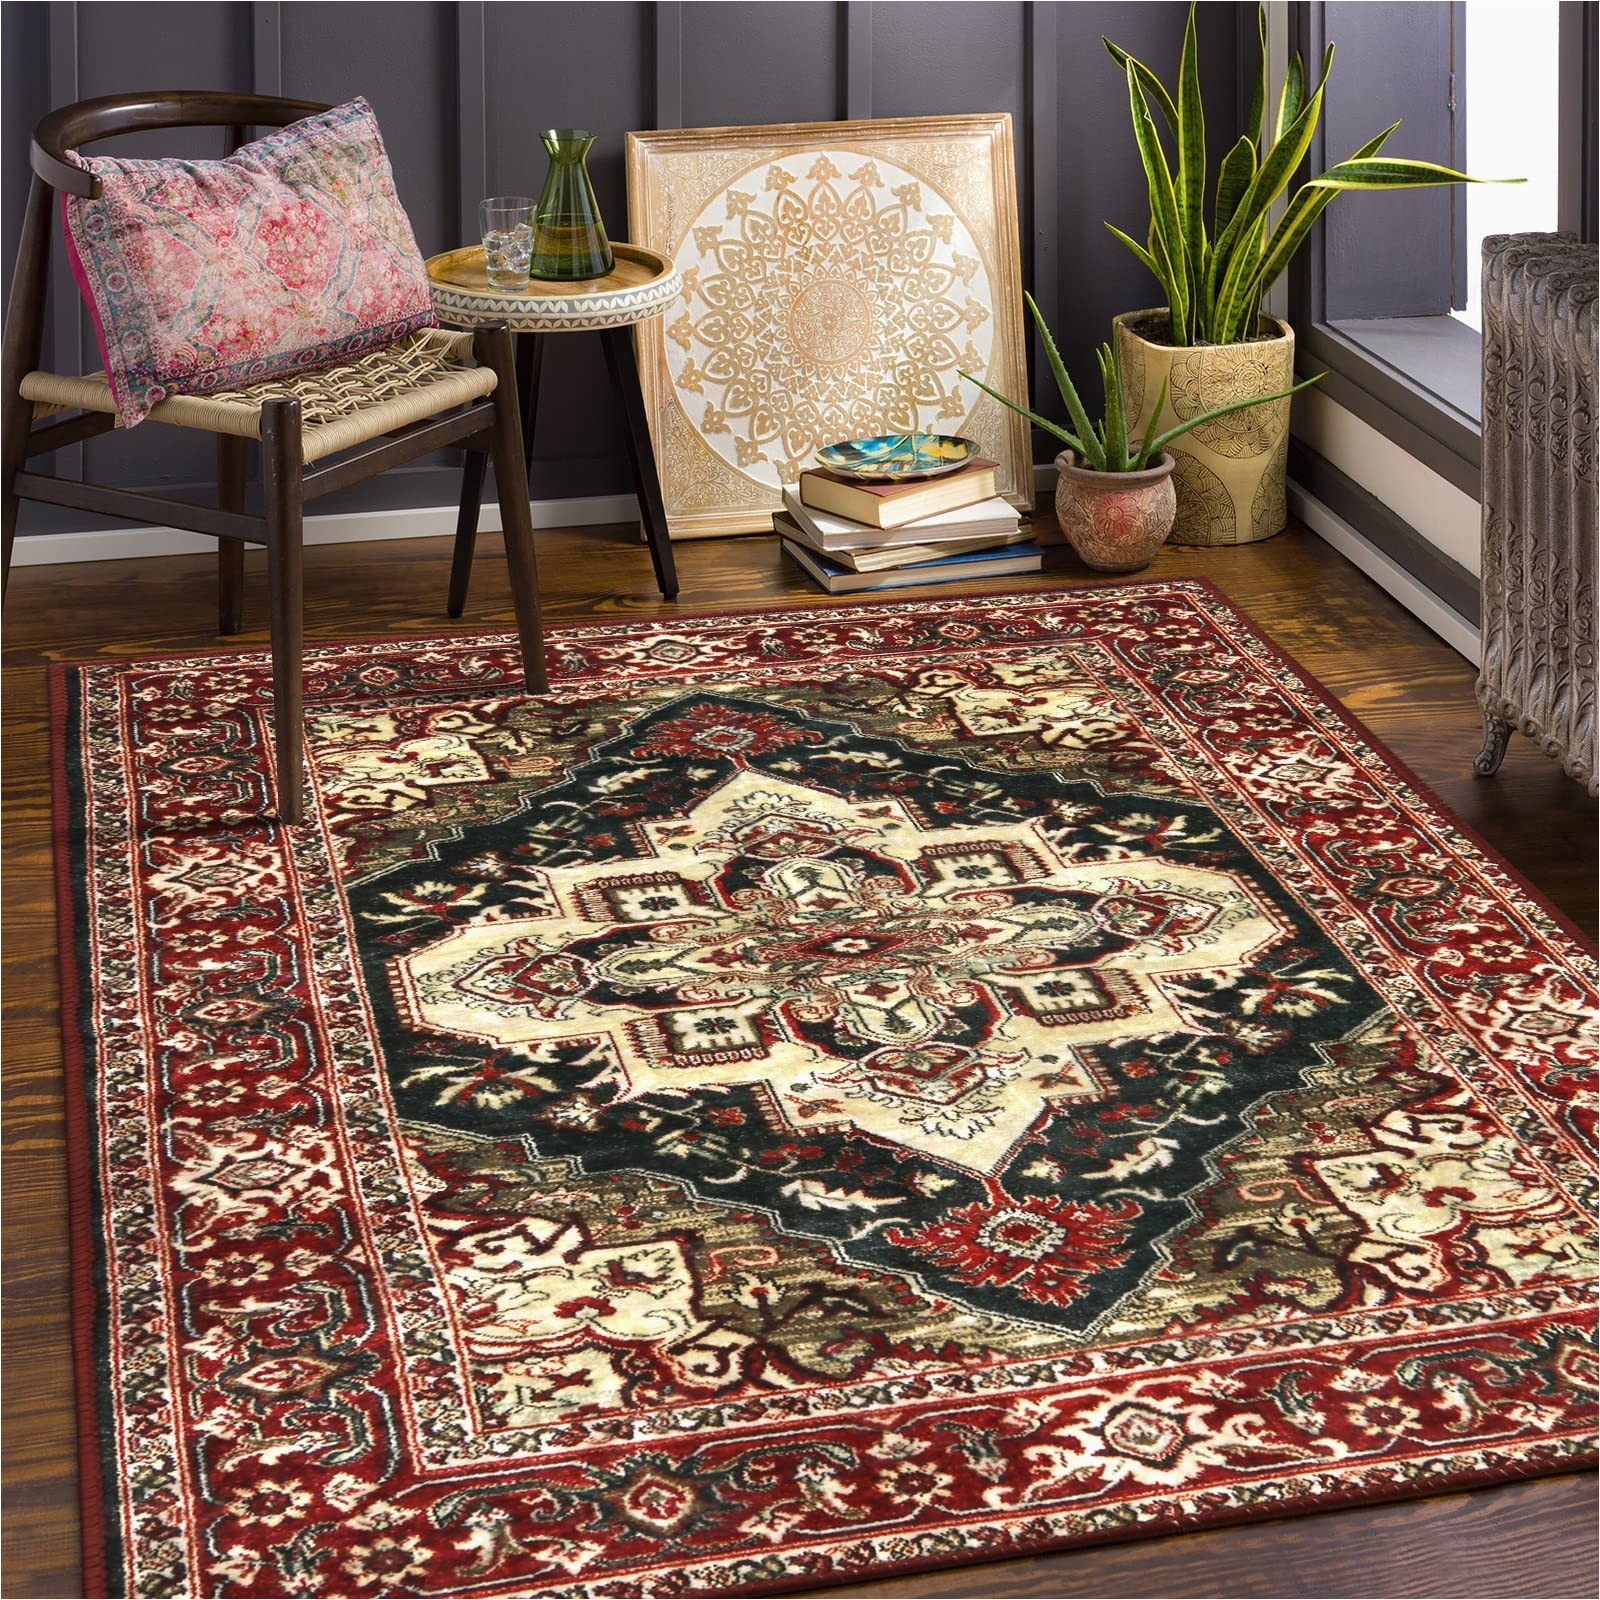 4 X 6 oriental area Rugs Traditional Collection area Rug 4×6 Ft Leevan Non Slip Washable Medallion Rugs Persian oriental Vintage Floor Carpet Distressed Floral Accent Throws …